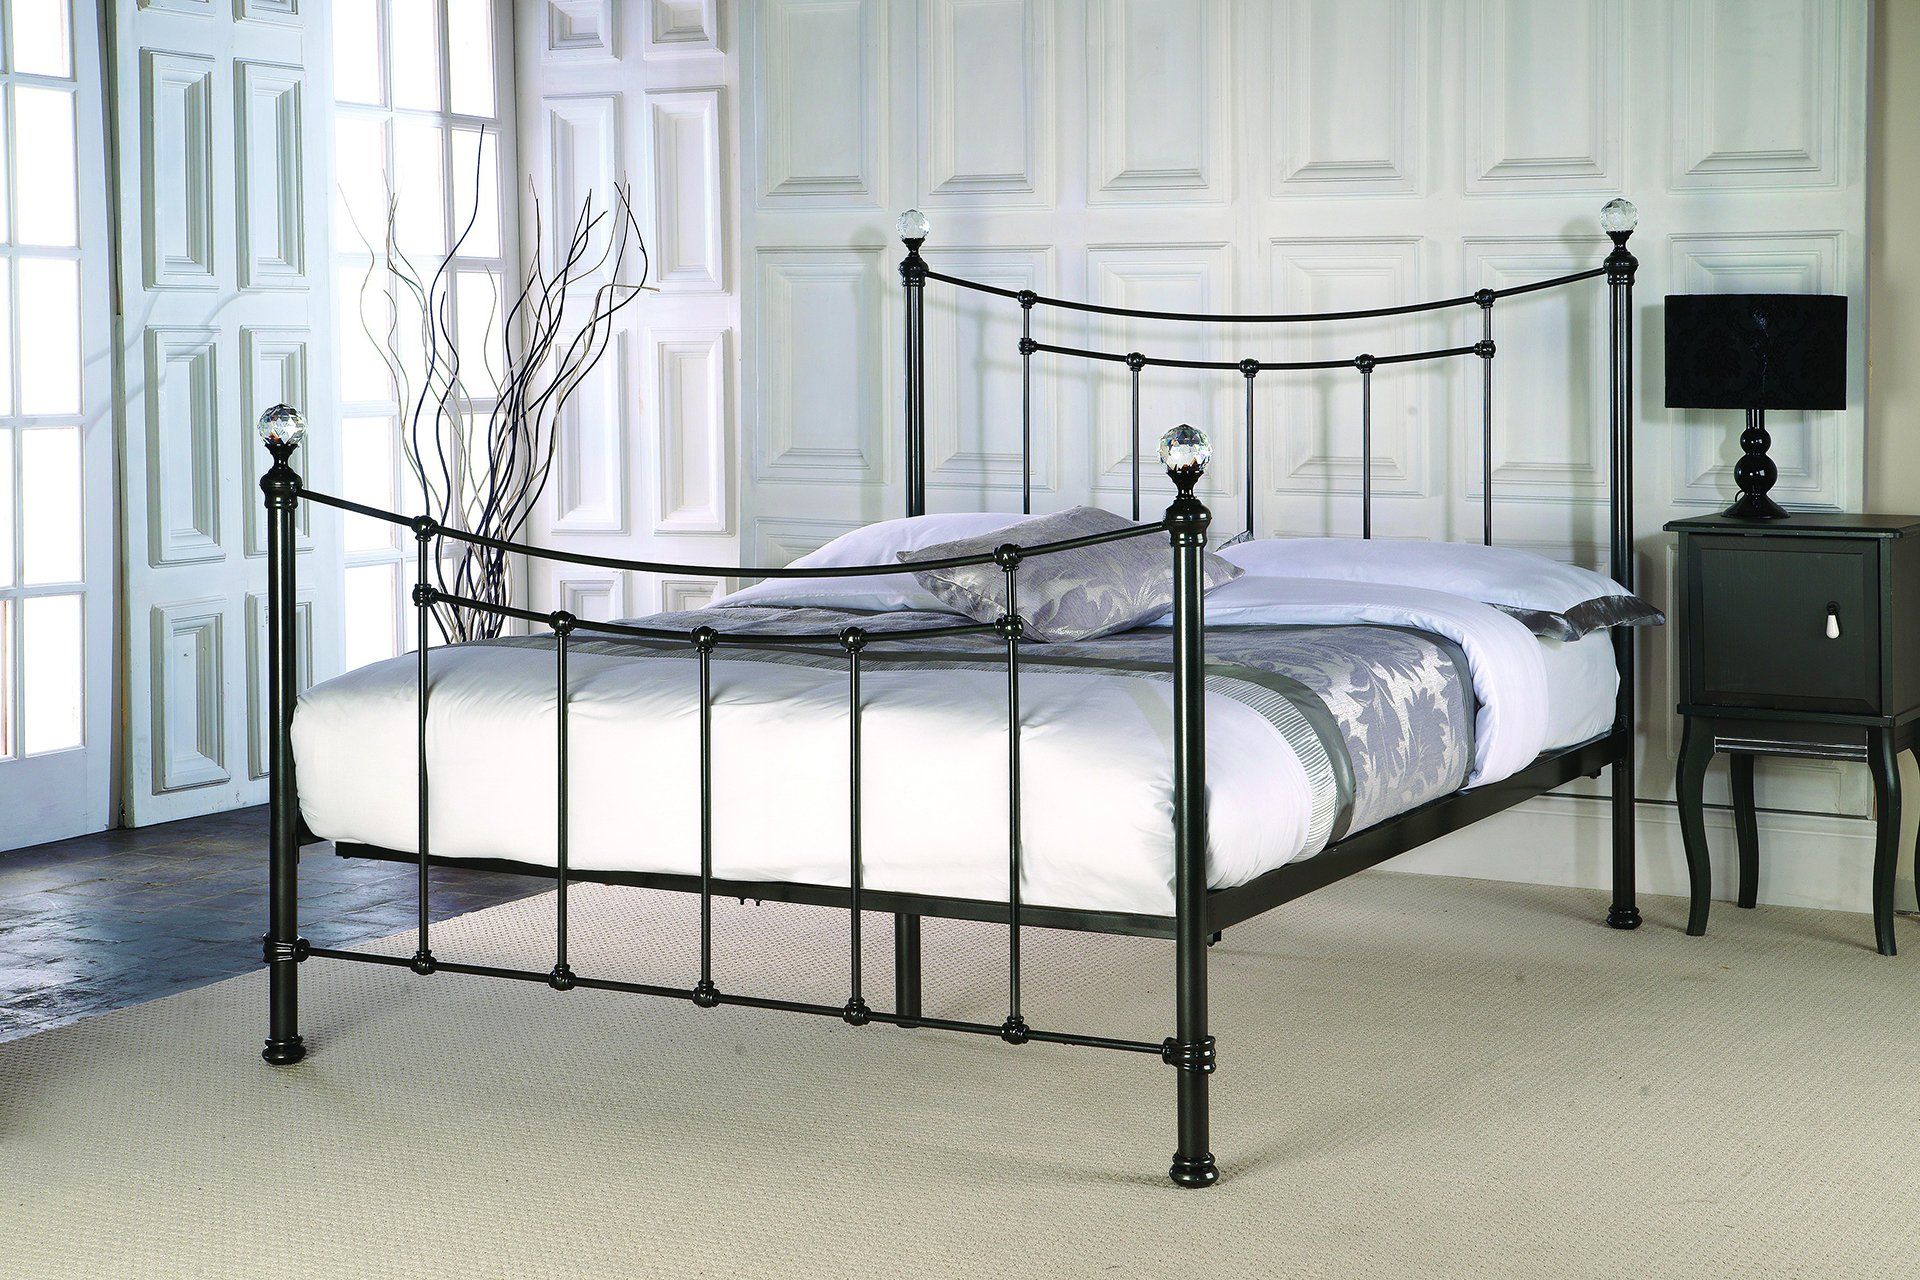 Looking to buy a new bed?